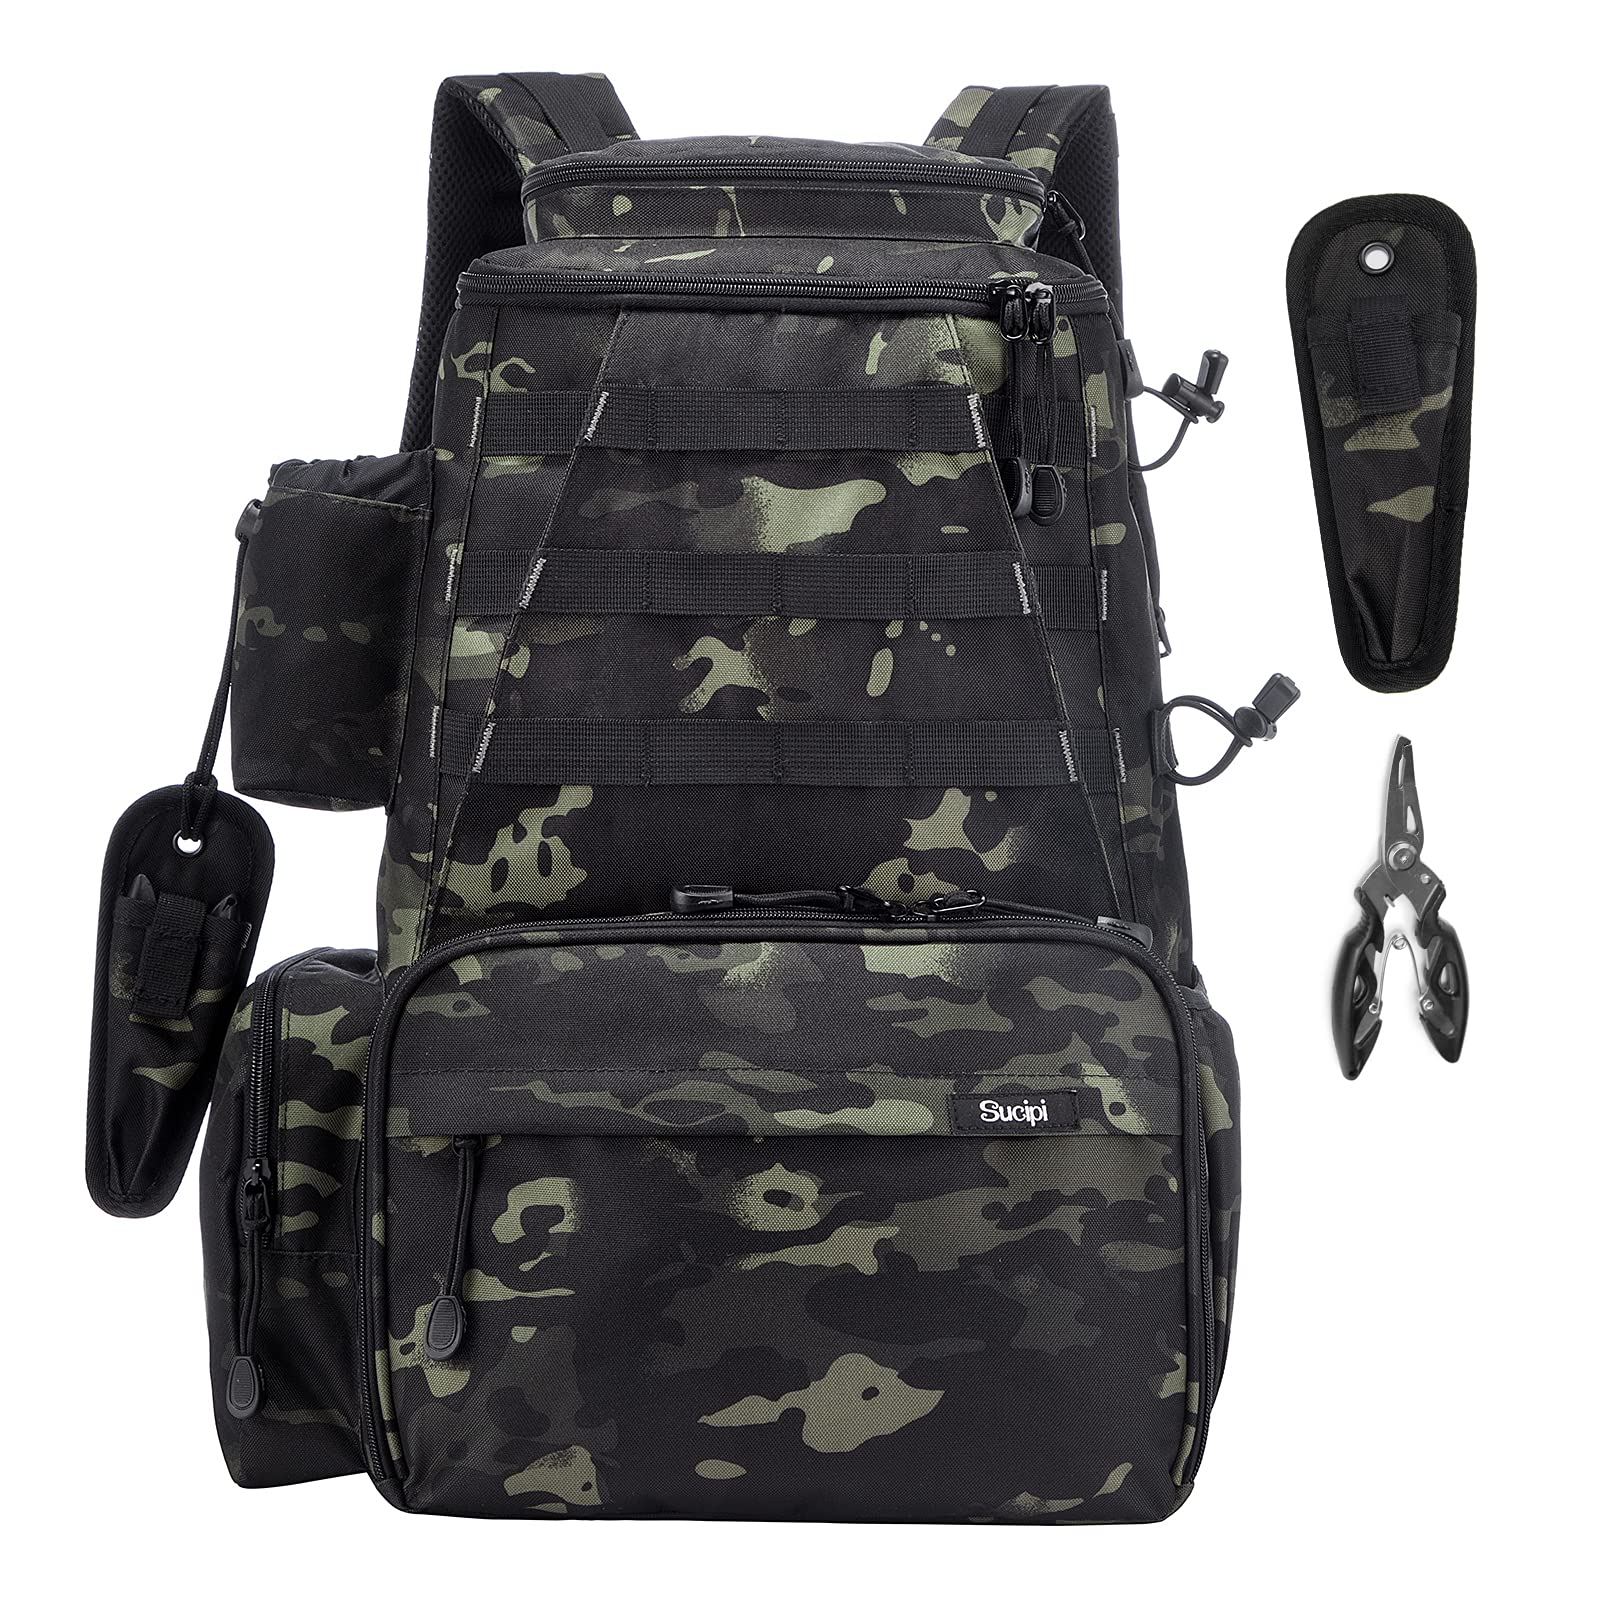 Large Fishing Backpack with Cooler Waterproof Rod Holder Storage Bag Gear 